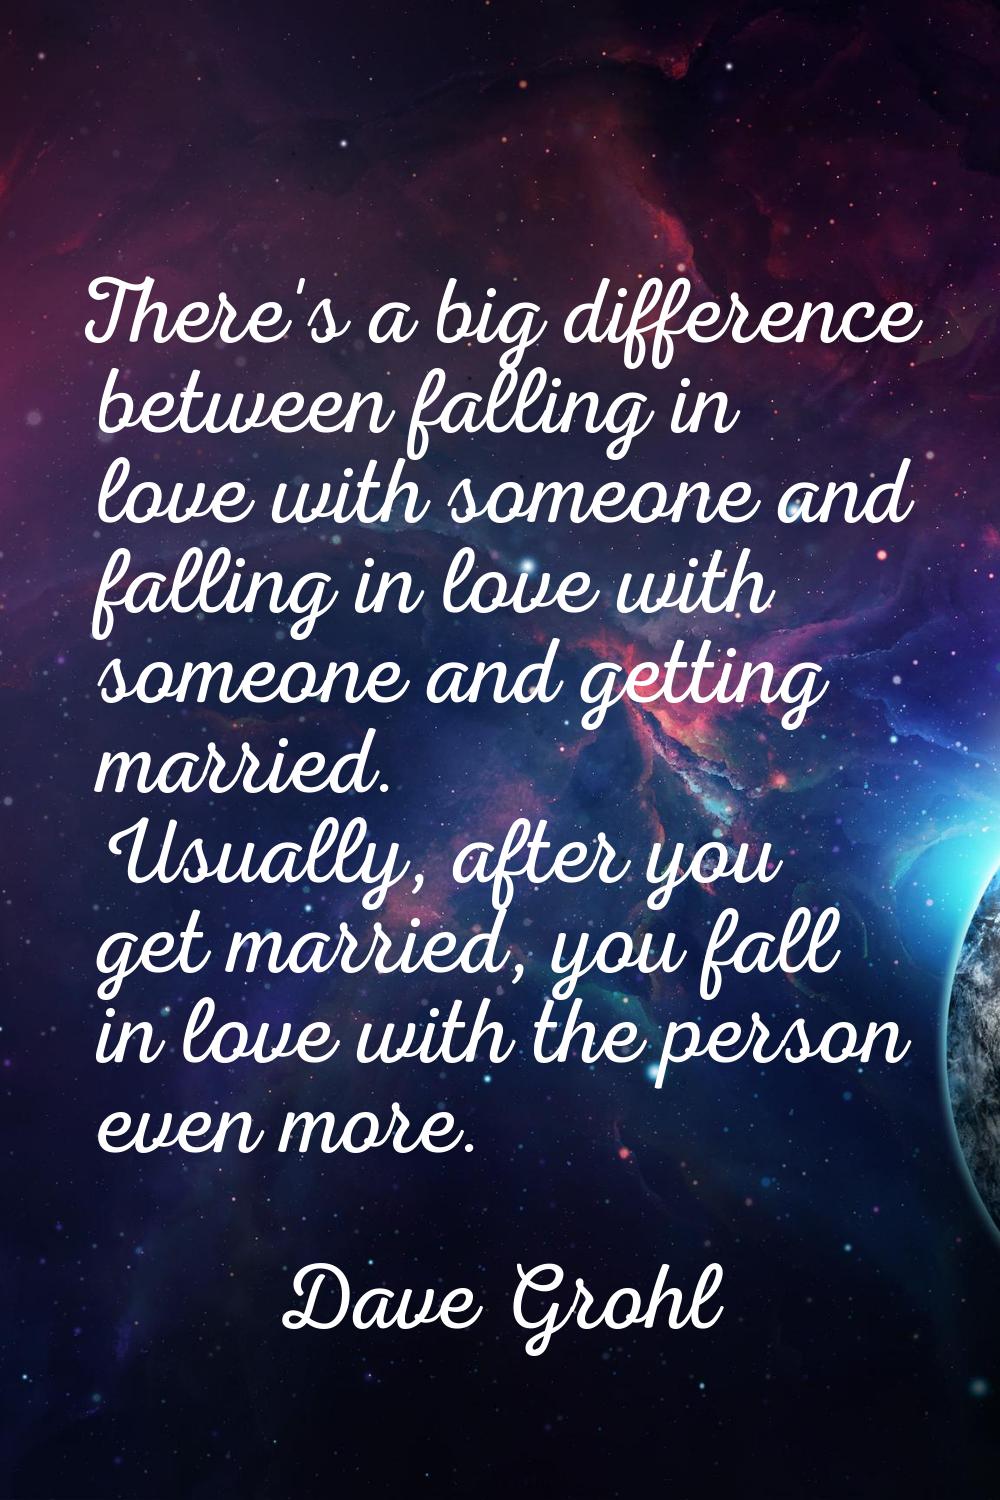 There's a big difference between falling in love with someone and falling in love with someone and 